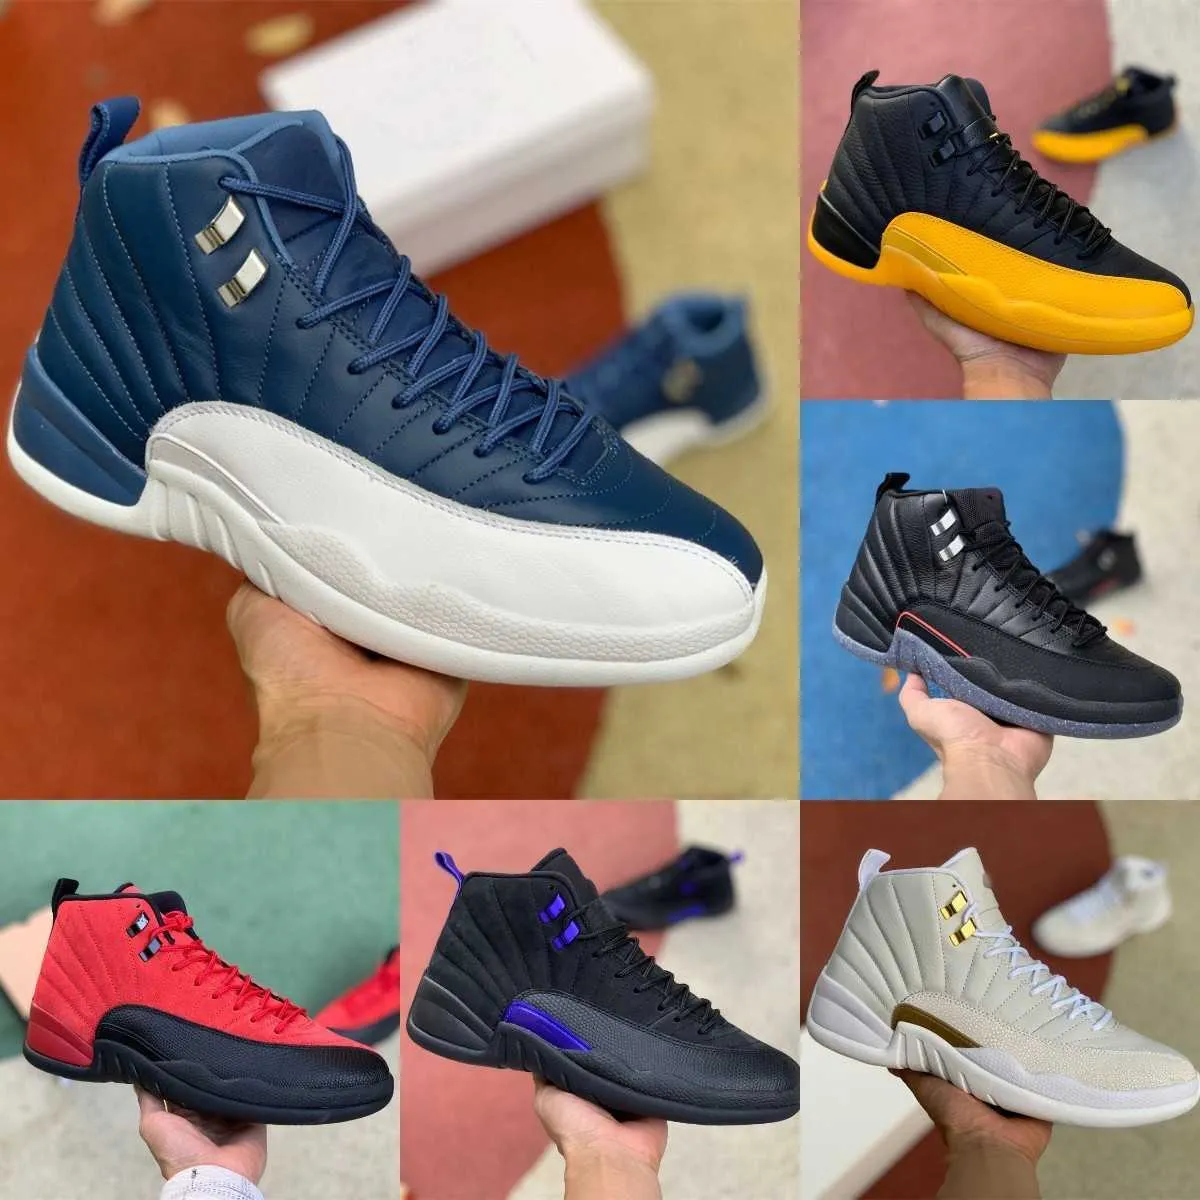 Jumpman Utility Grind 12 12S Heren High Basketball Shoes Twist Gold Indigo Flu Game Dark Concord Royalty Ovo White The Master Taxi Fiba Gamma Blue Trainer Sneakers S05